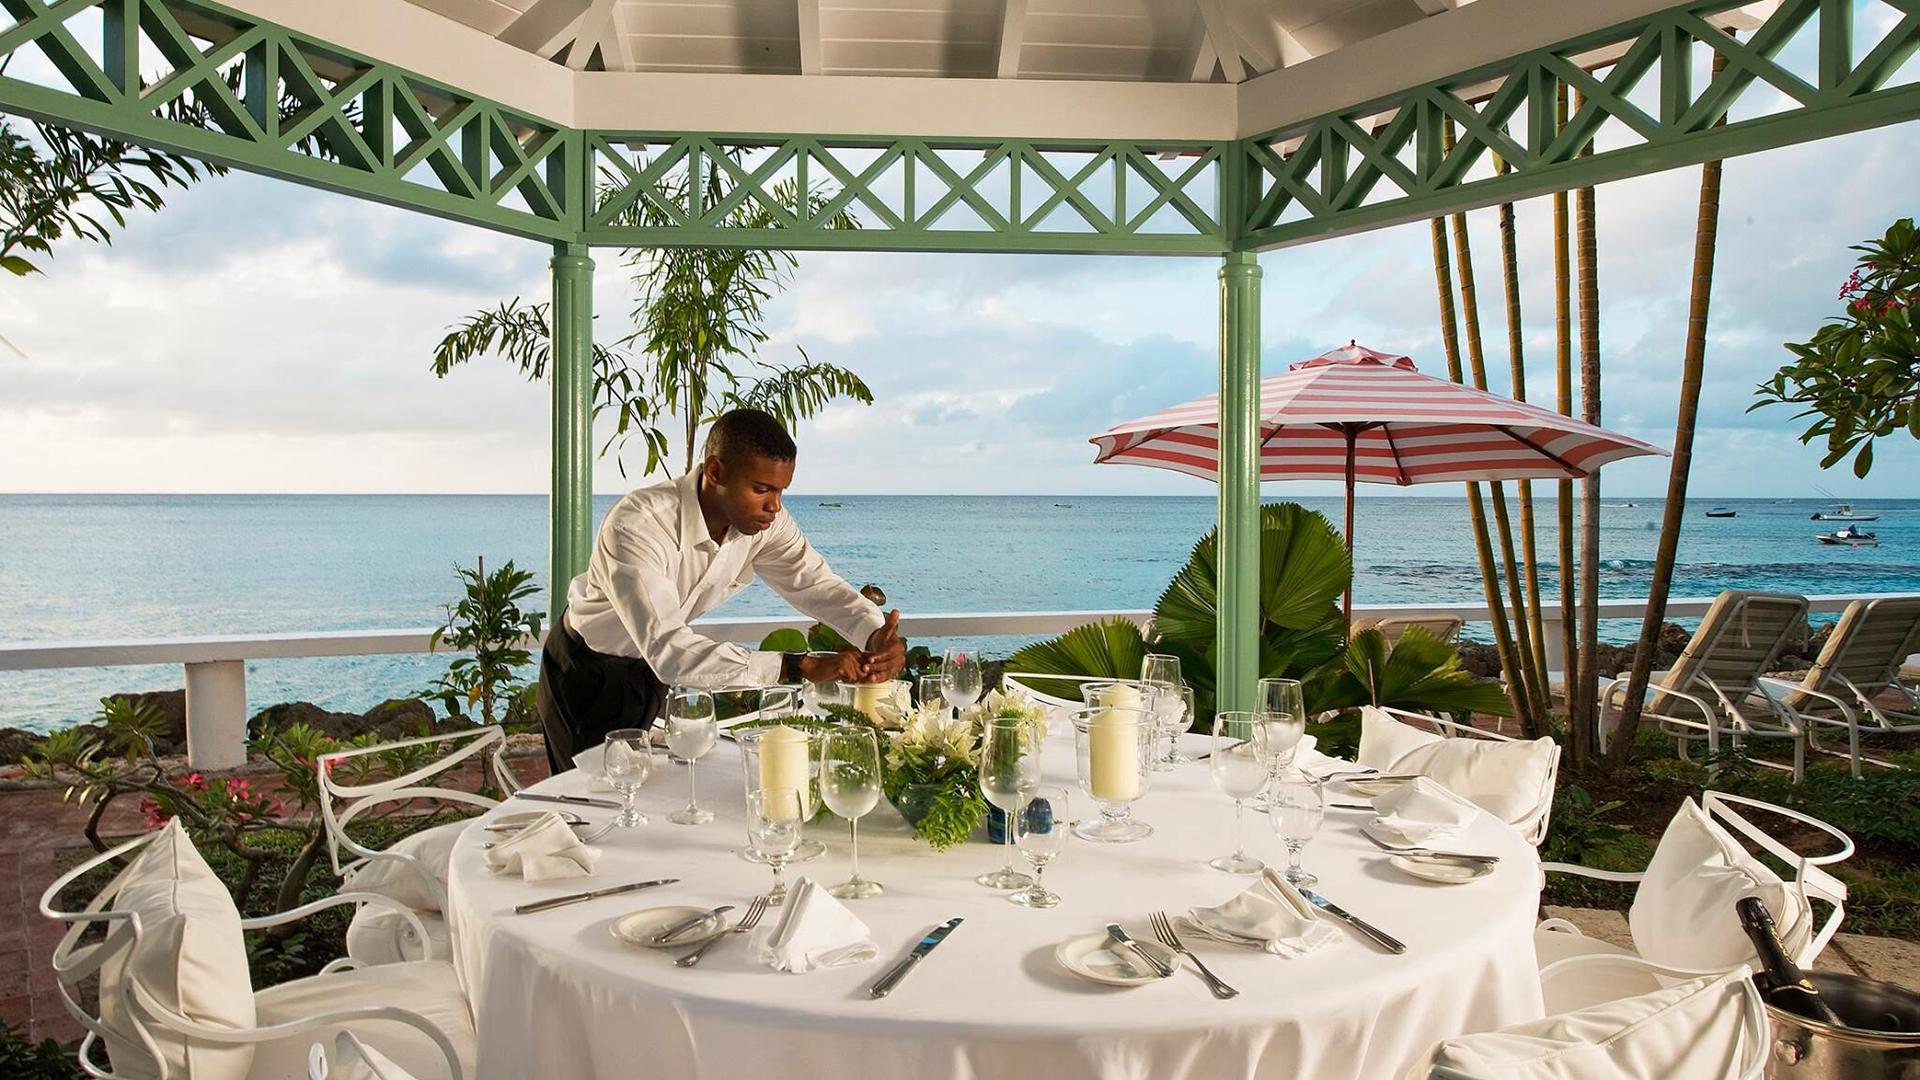 The best Caribbean islands to visit | Sea-side dining in Barbados